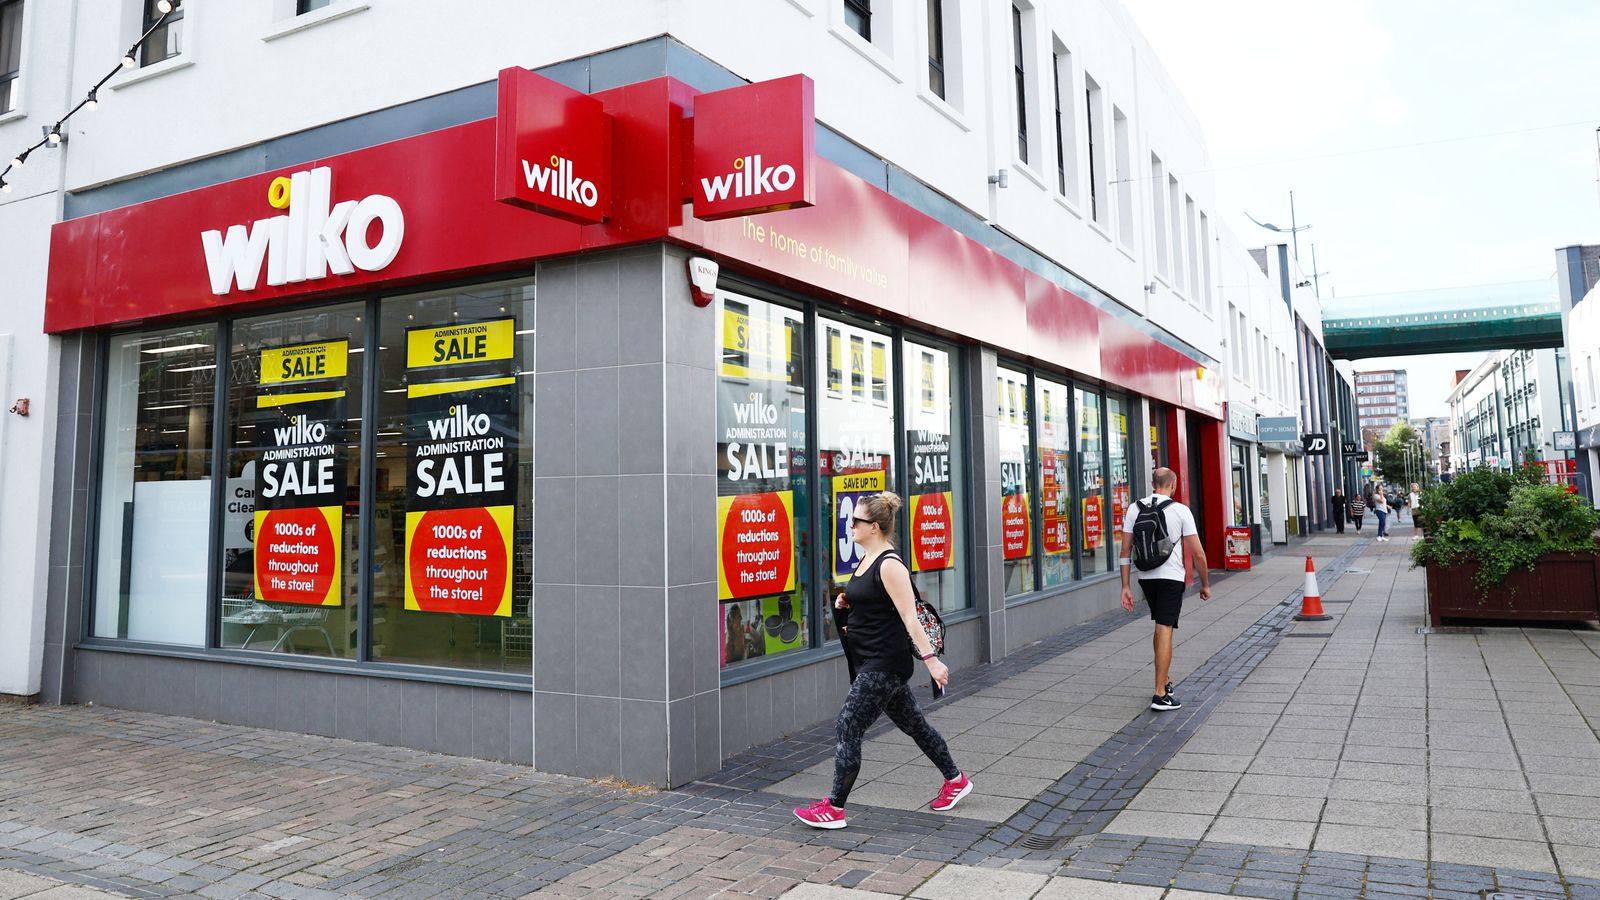 'Death knell': All Wilko stores to close with the loss of 12,500 jobs - union